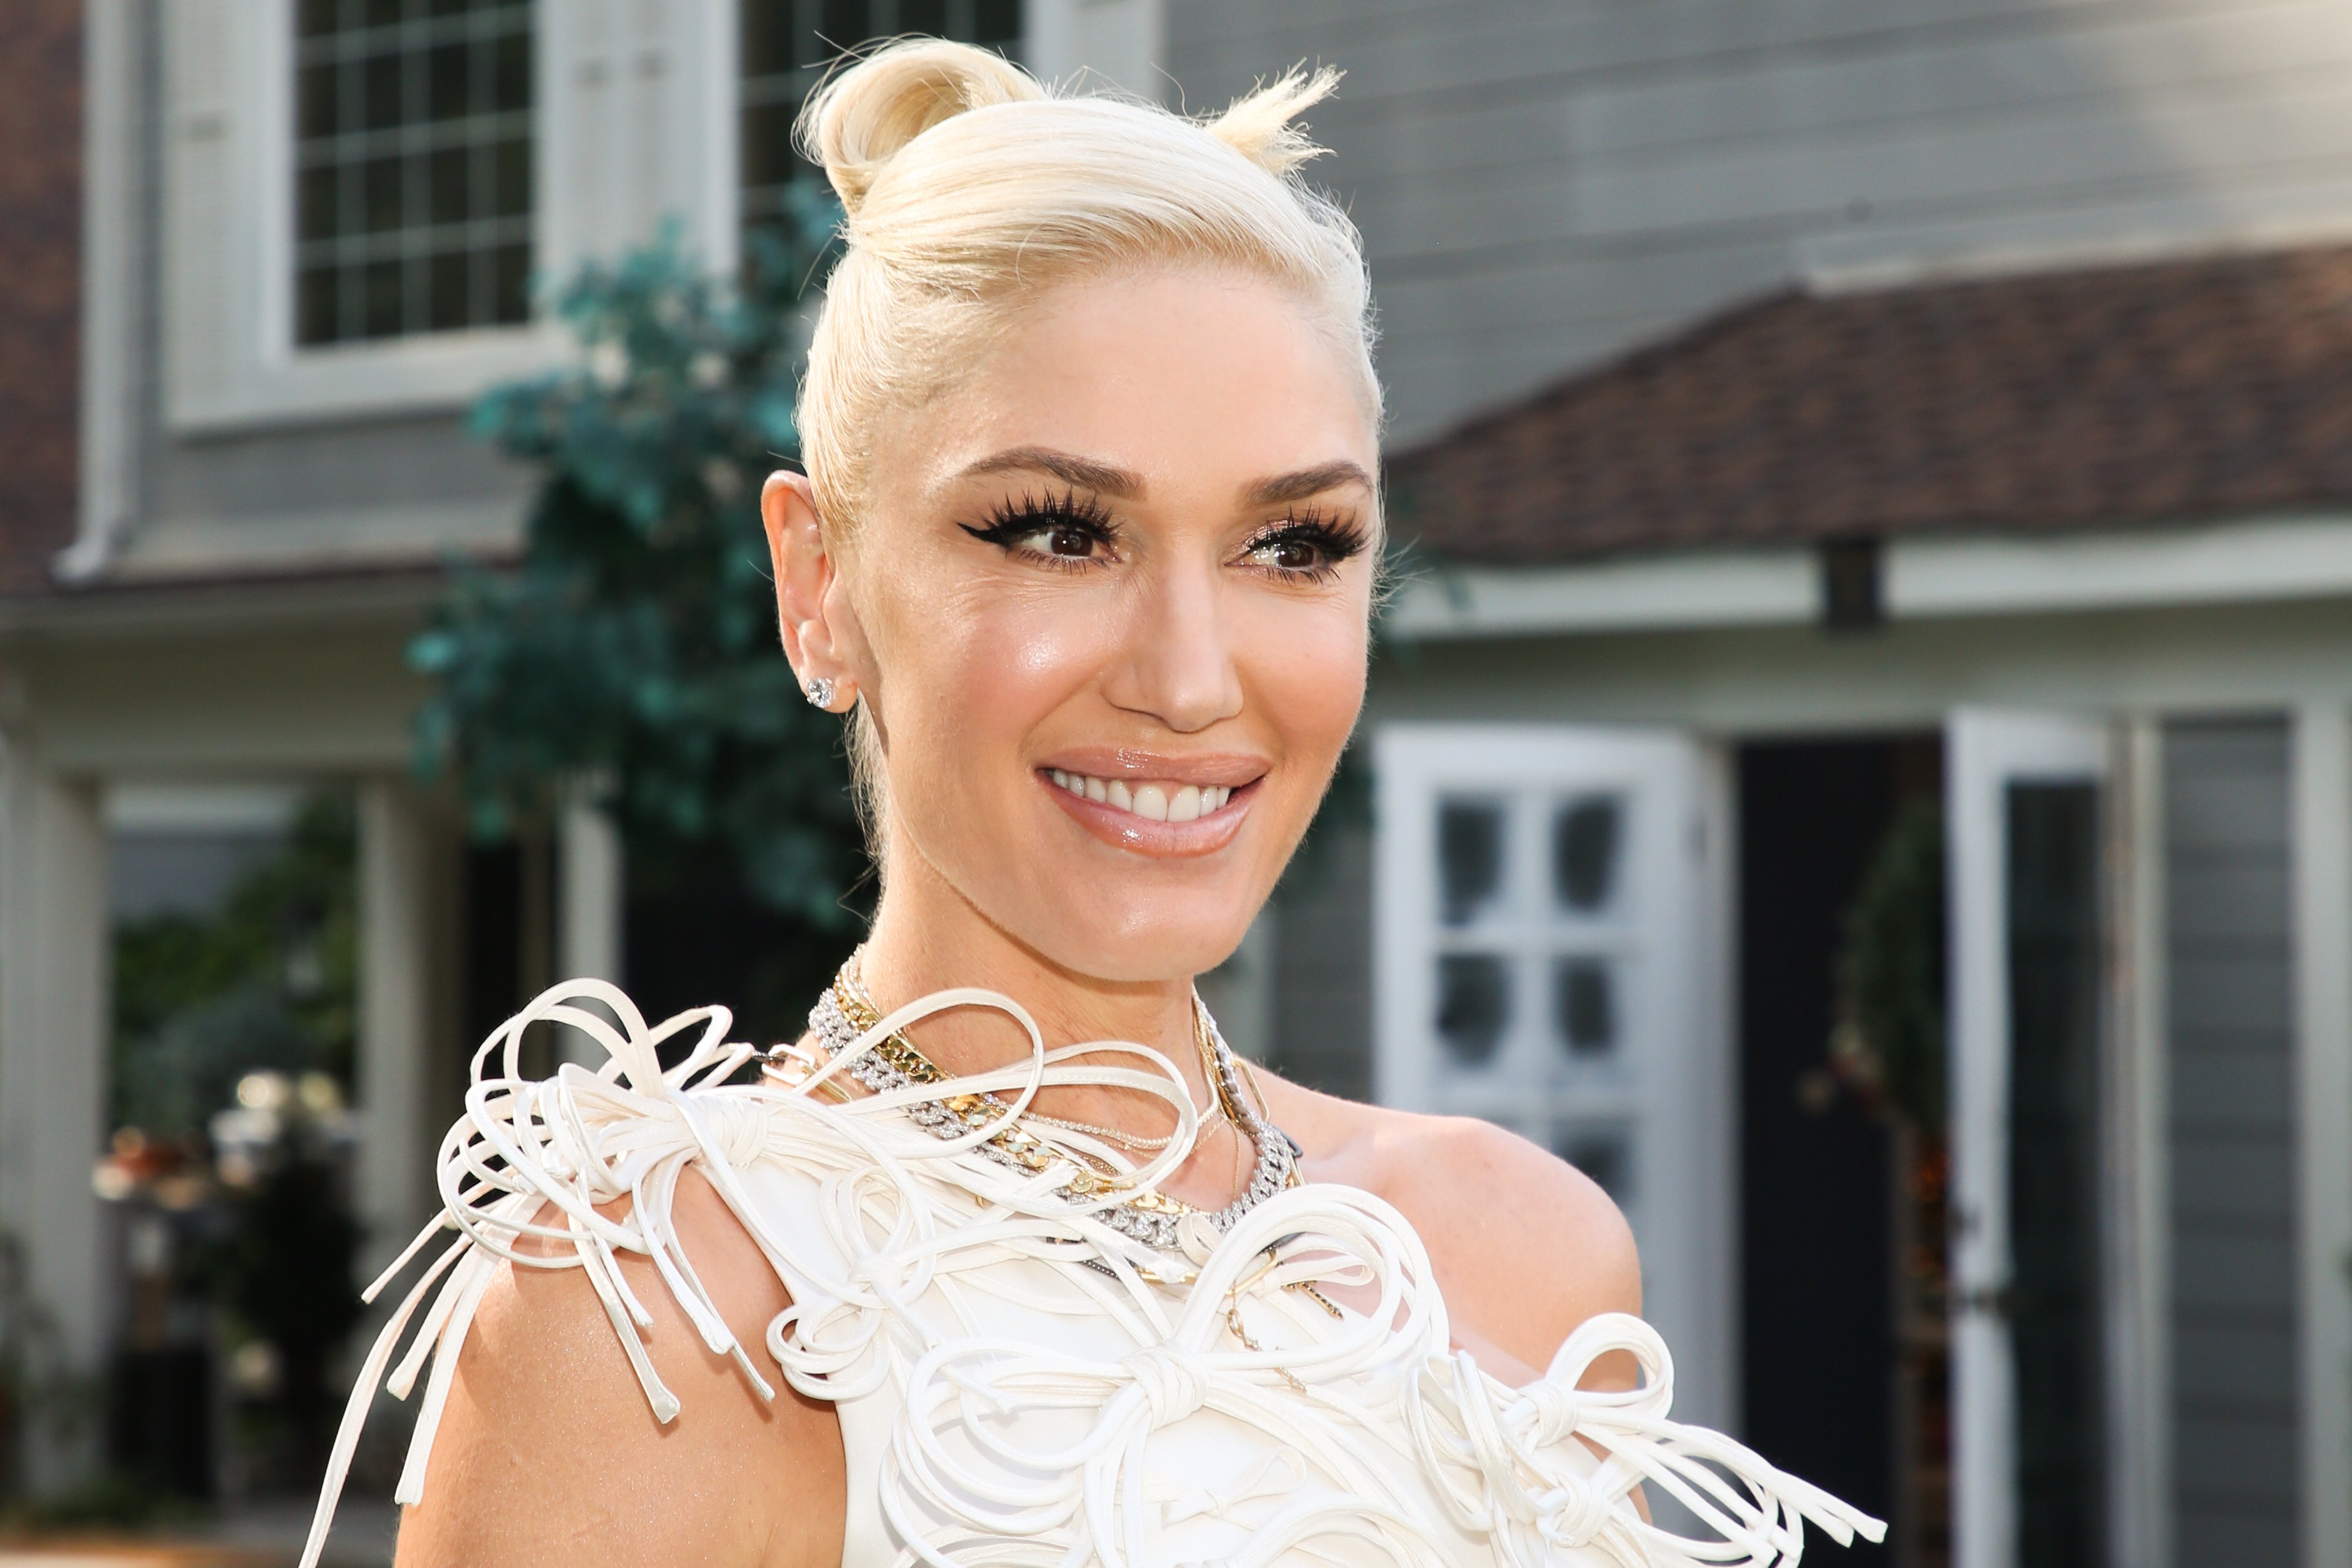  Gwen Stefani visits Hallmark Channel's "Home & Family" on December 02, 2020 in Universal City, California. | Source: Getty Images.